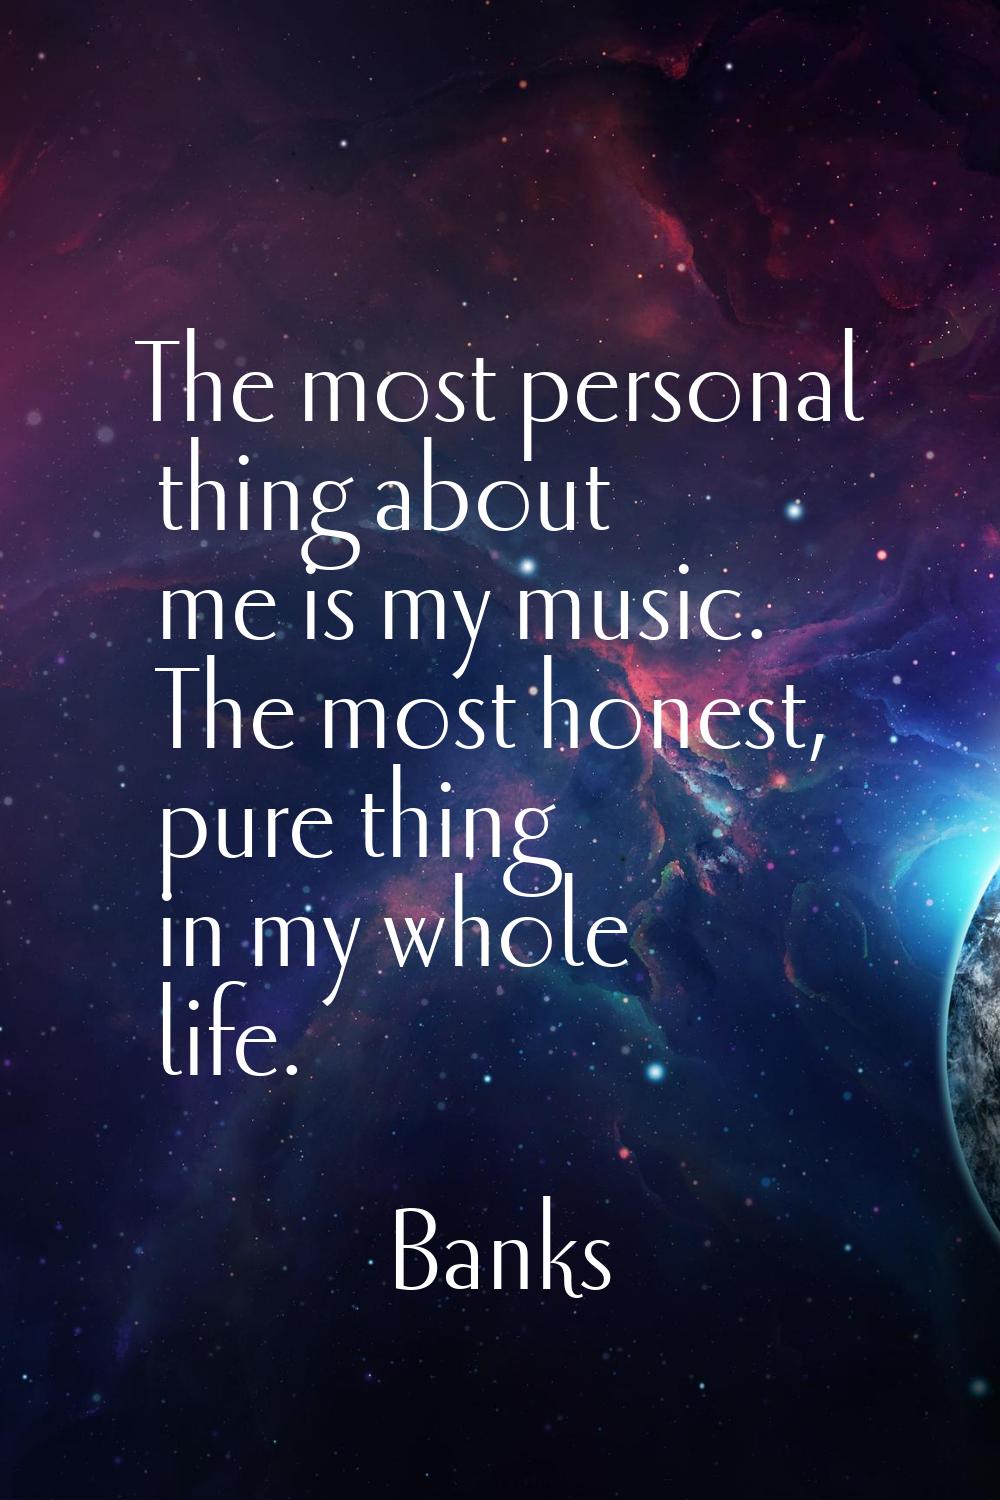 The most personal thing about me is my music. The most honest, pure thing in my whole life.